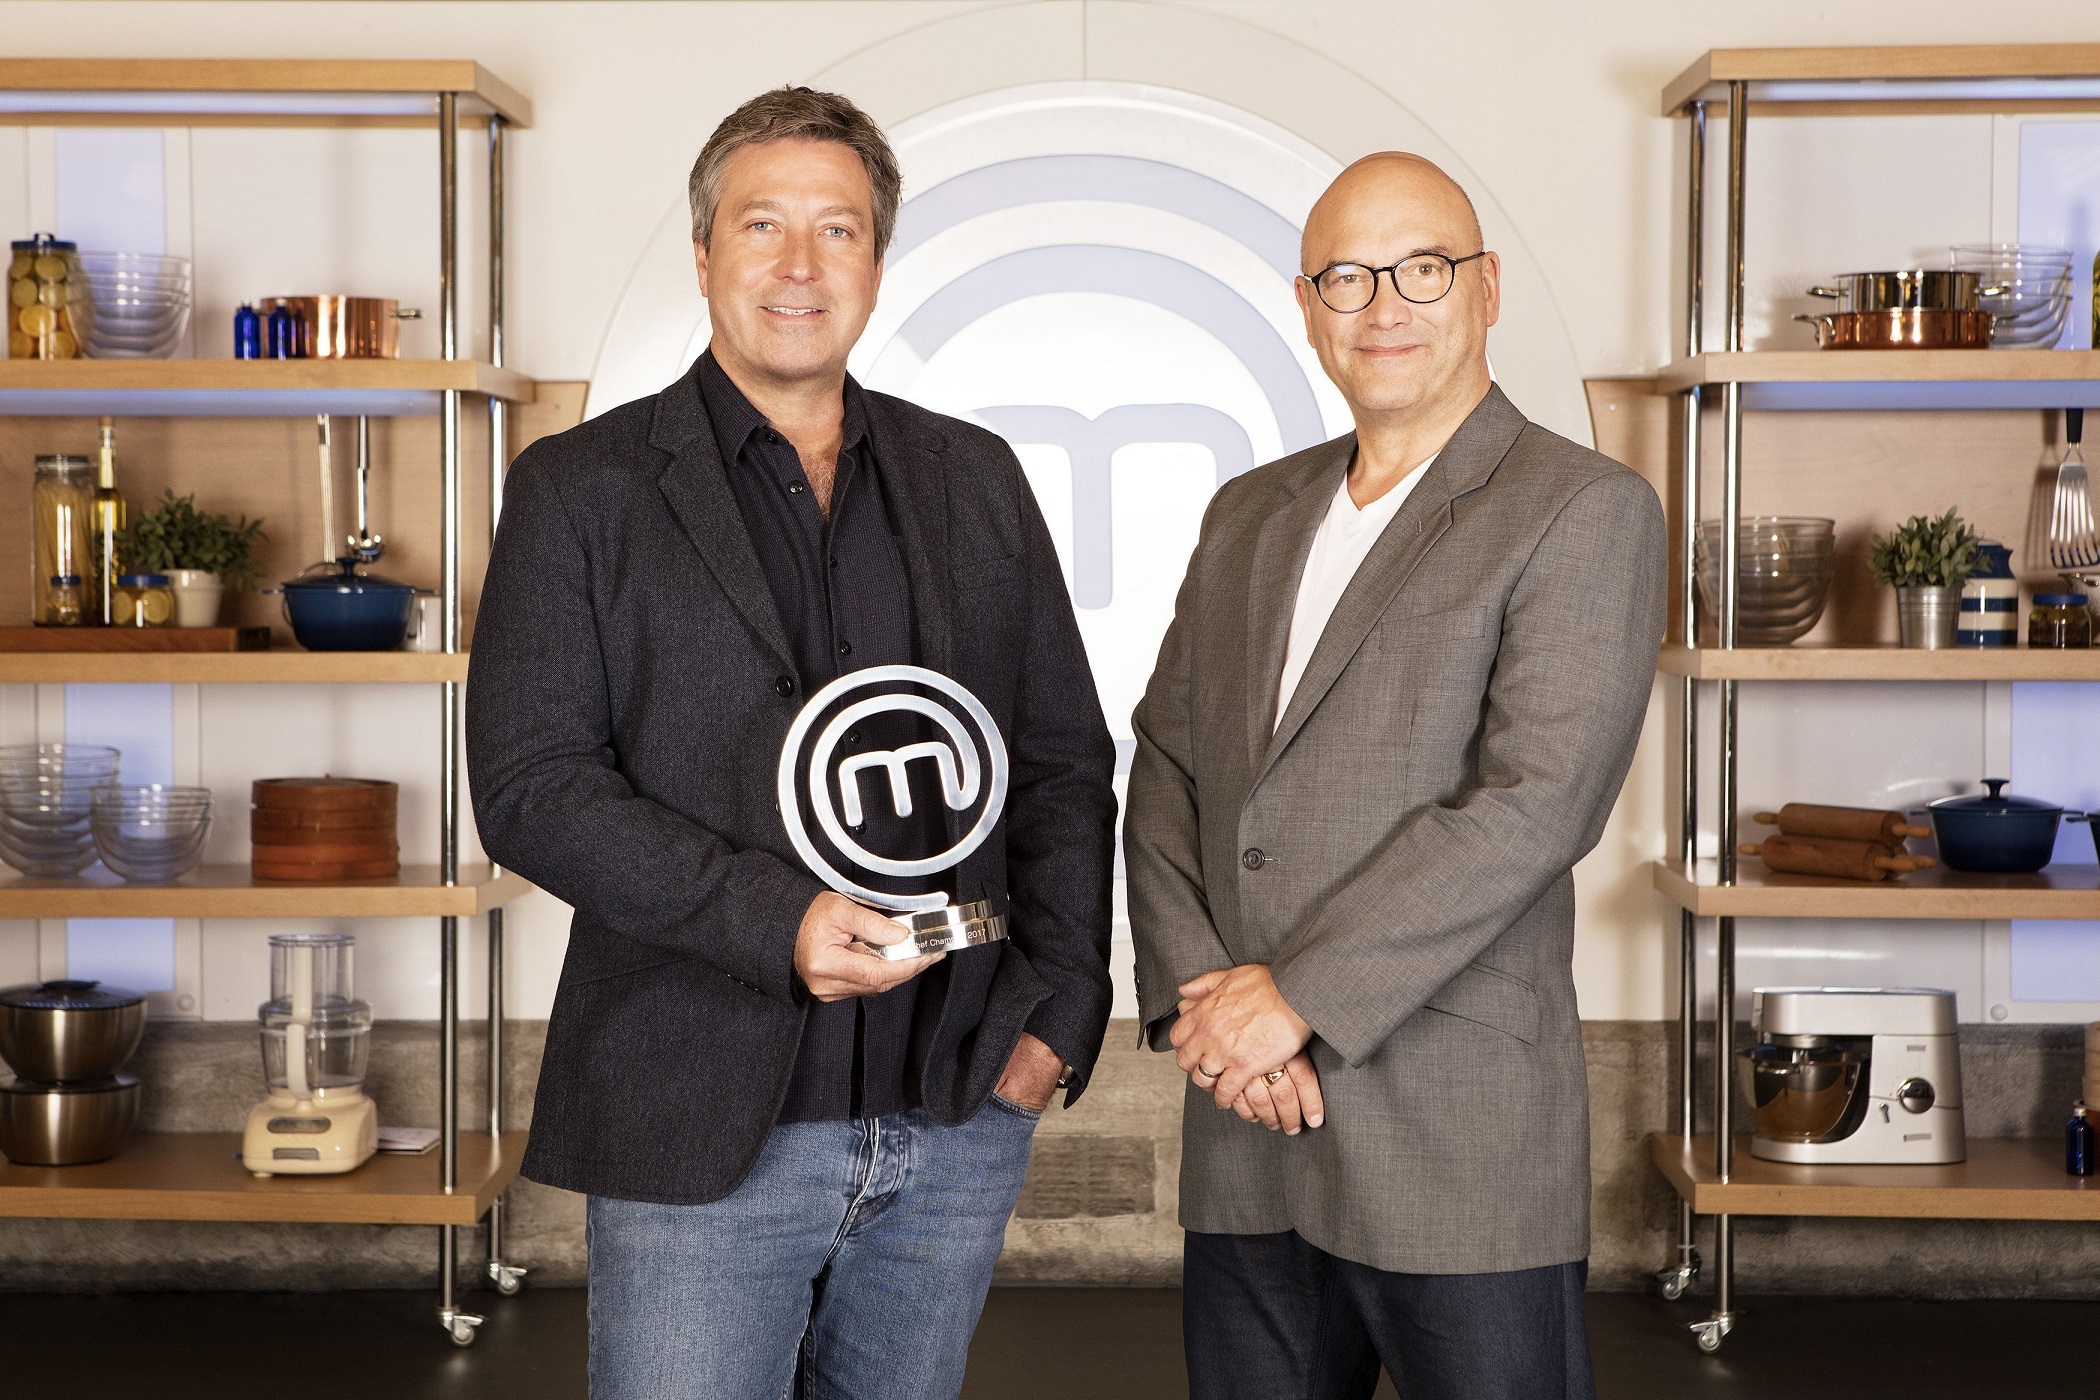 MasterChef judges of the UK show John Torode and Gregg Wallace (BBC/PA)